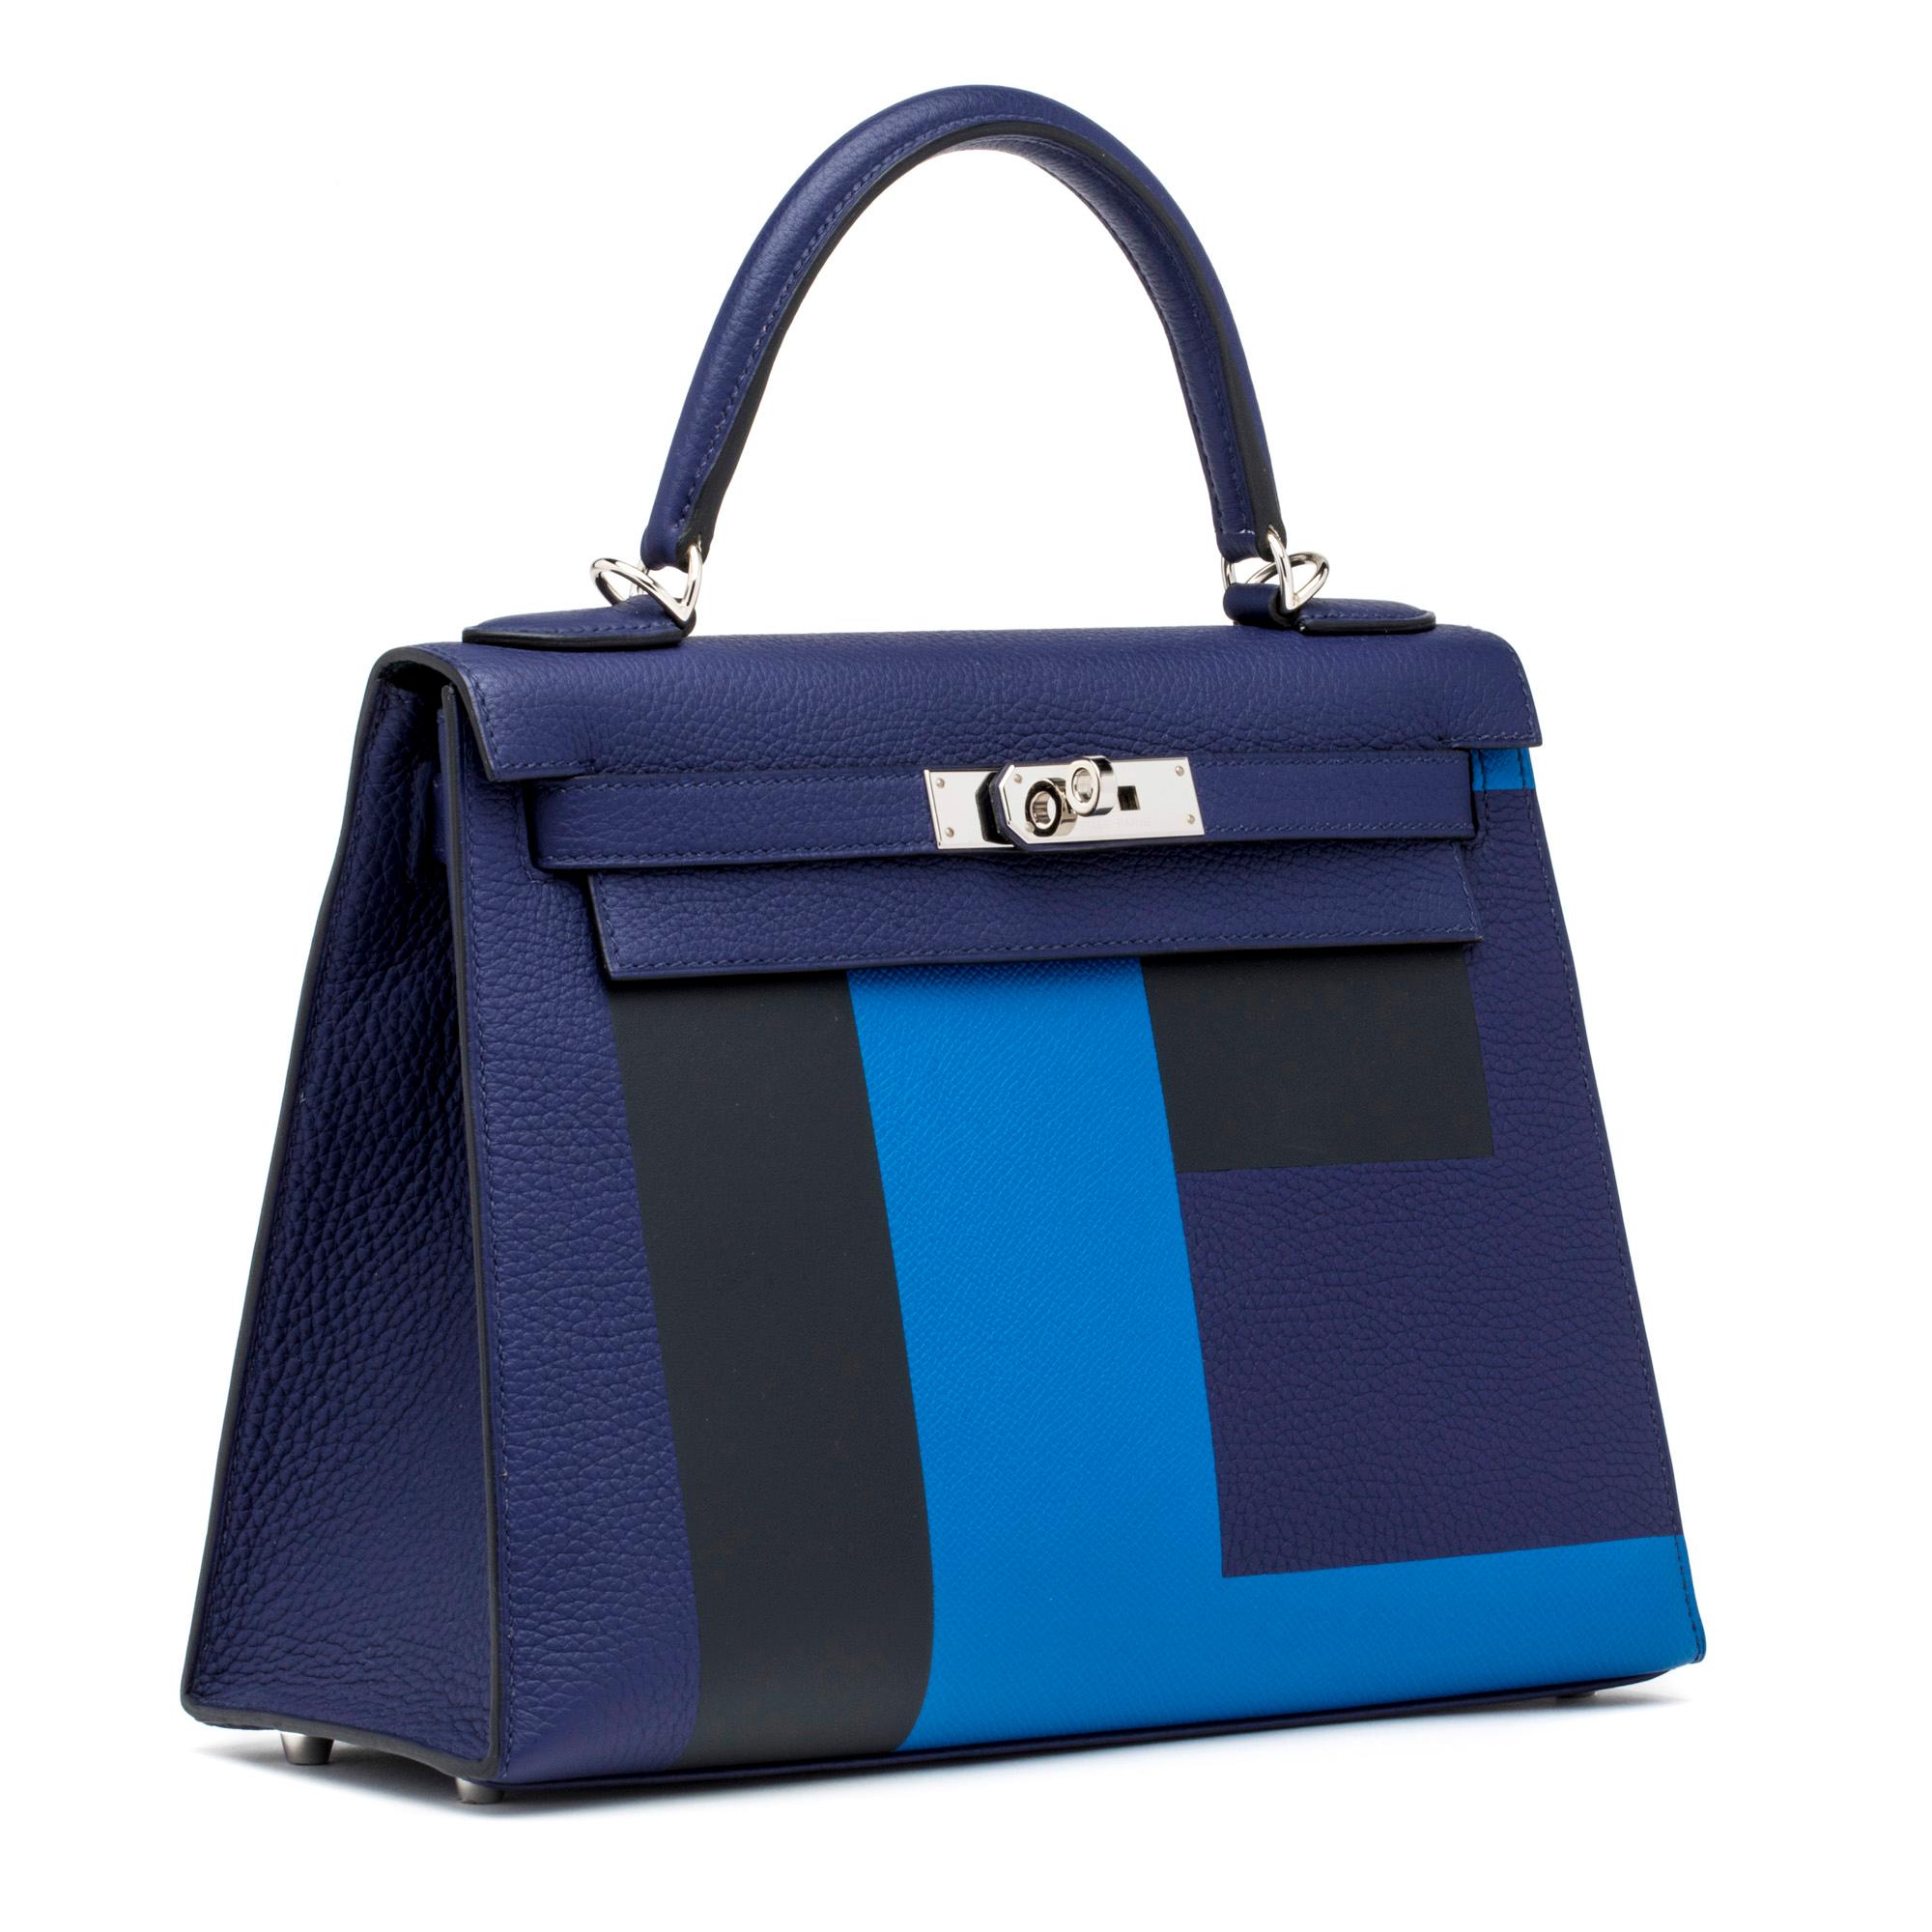 The Hermés Kelly bag embodies the quintessence of style and luxury due to its impeccable design, craftsmanship, and significance. That being said, it is the most iconic and desired piece from the Hermés handbag collection.

Limited to a certain